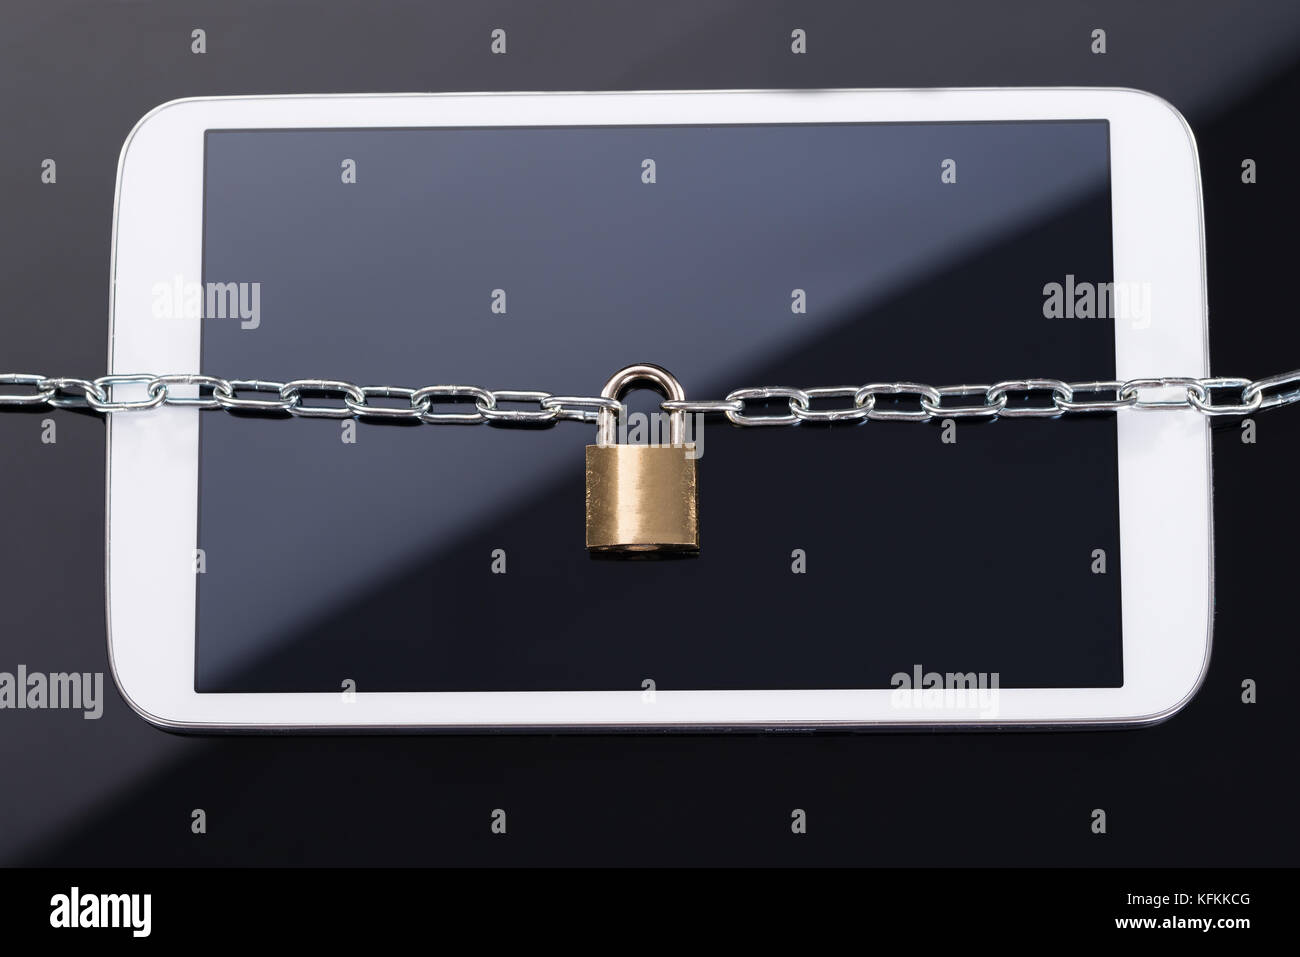 Mobile data security concept over black background Stock Photo